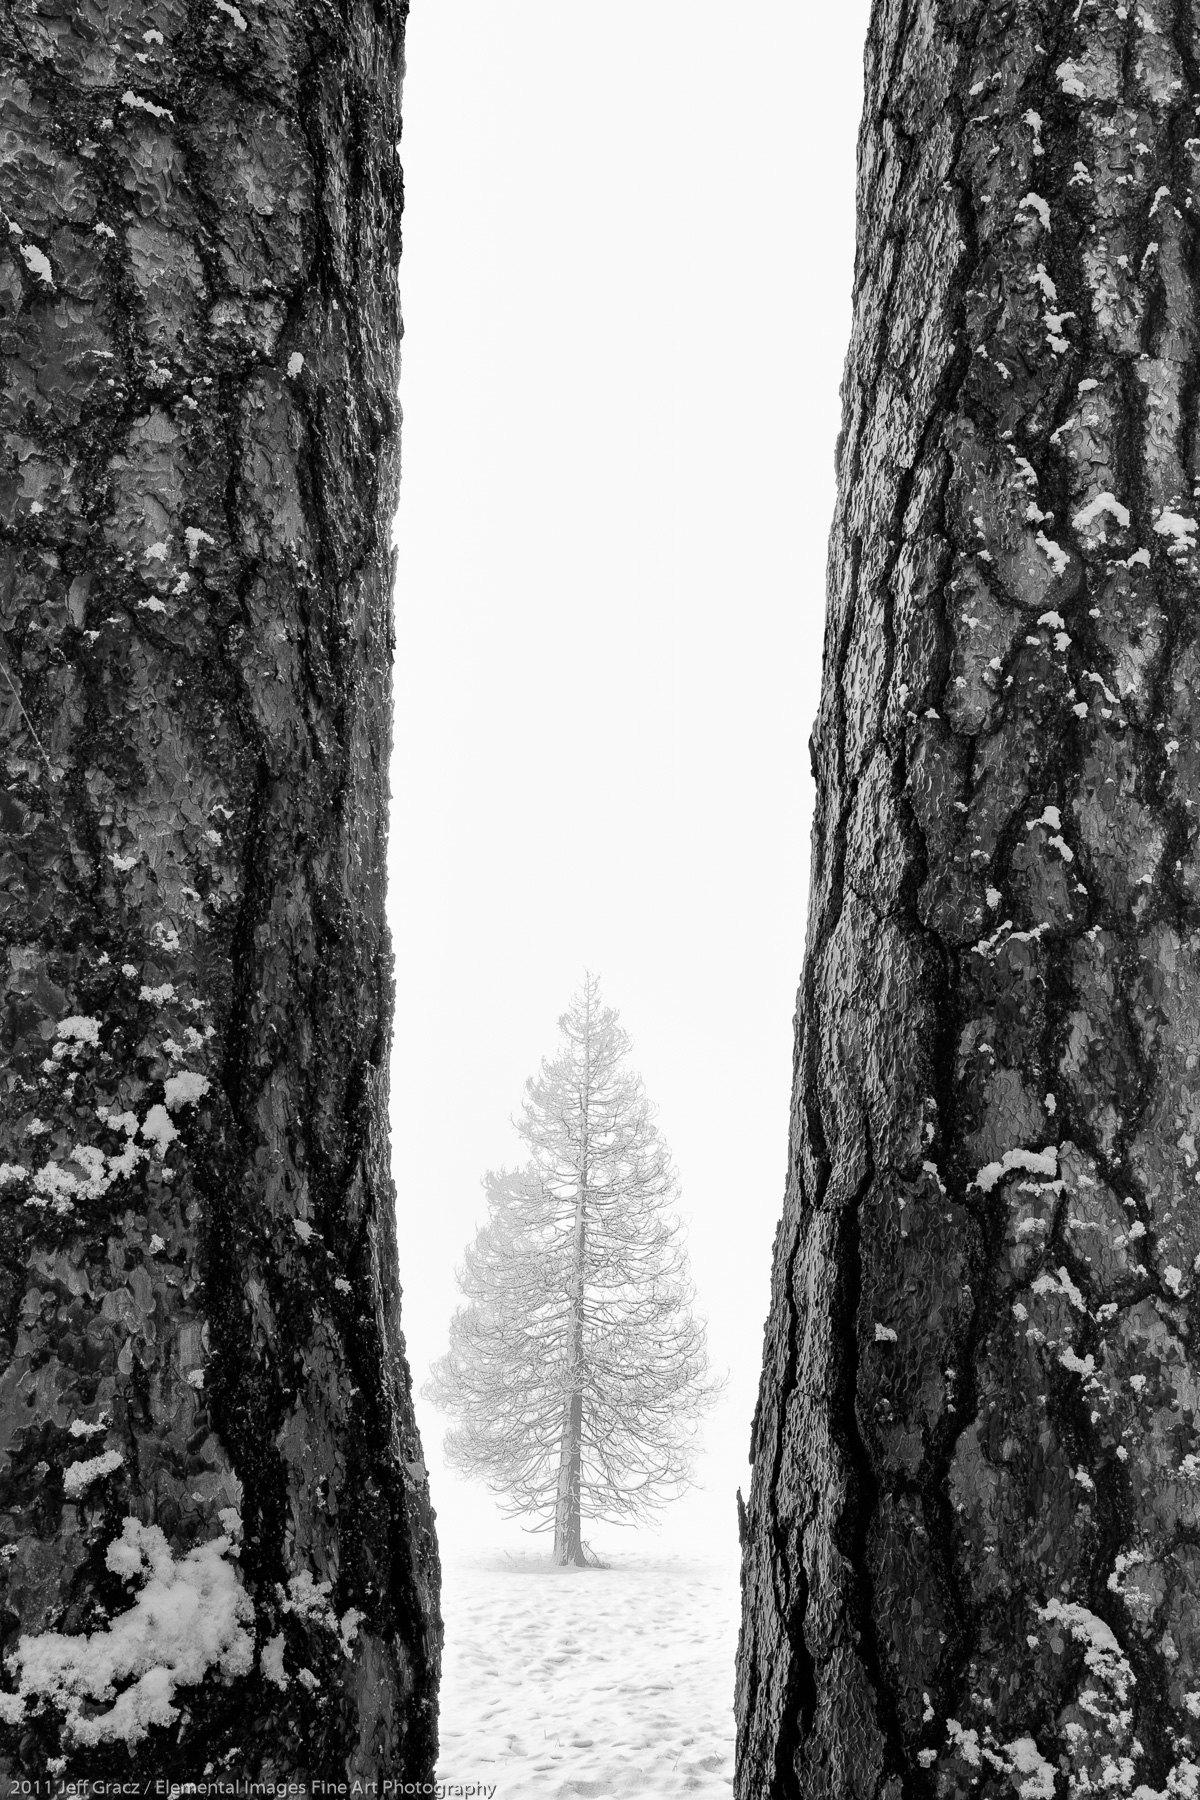 Three trees | Yosemite National Park | CA | USA - © 2011 Jeff Gracz / Elemental Images Fine Art Photography - All Rights Reserved Worldwide